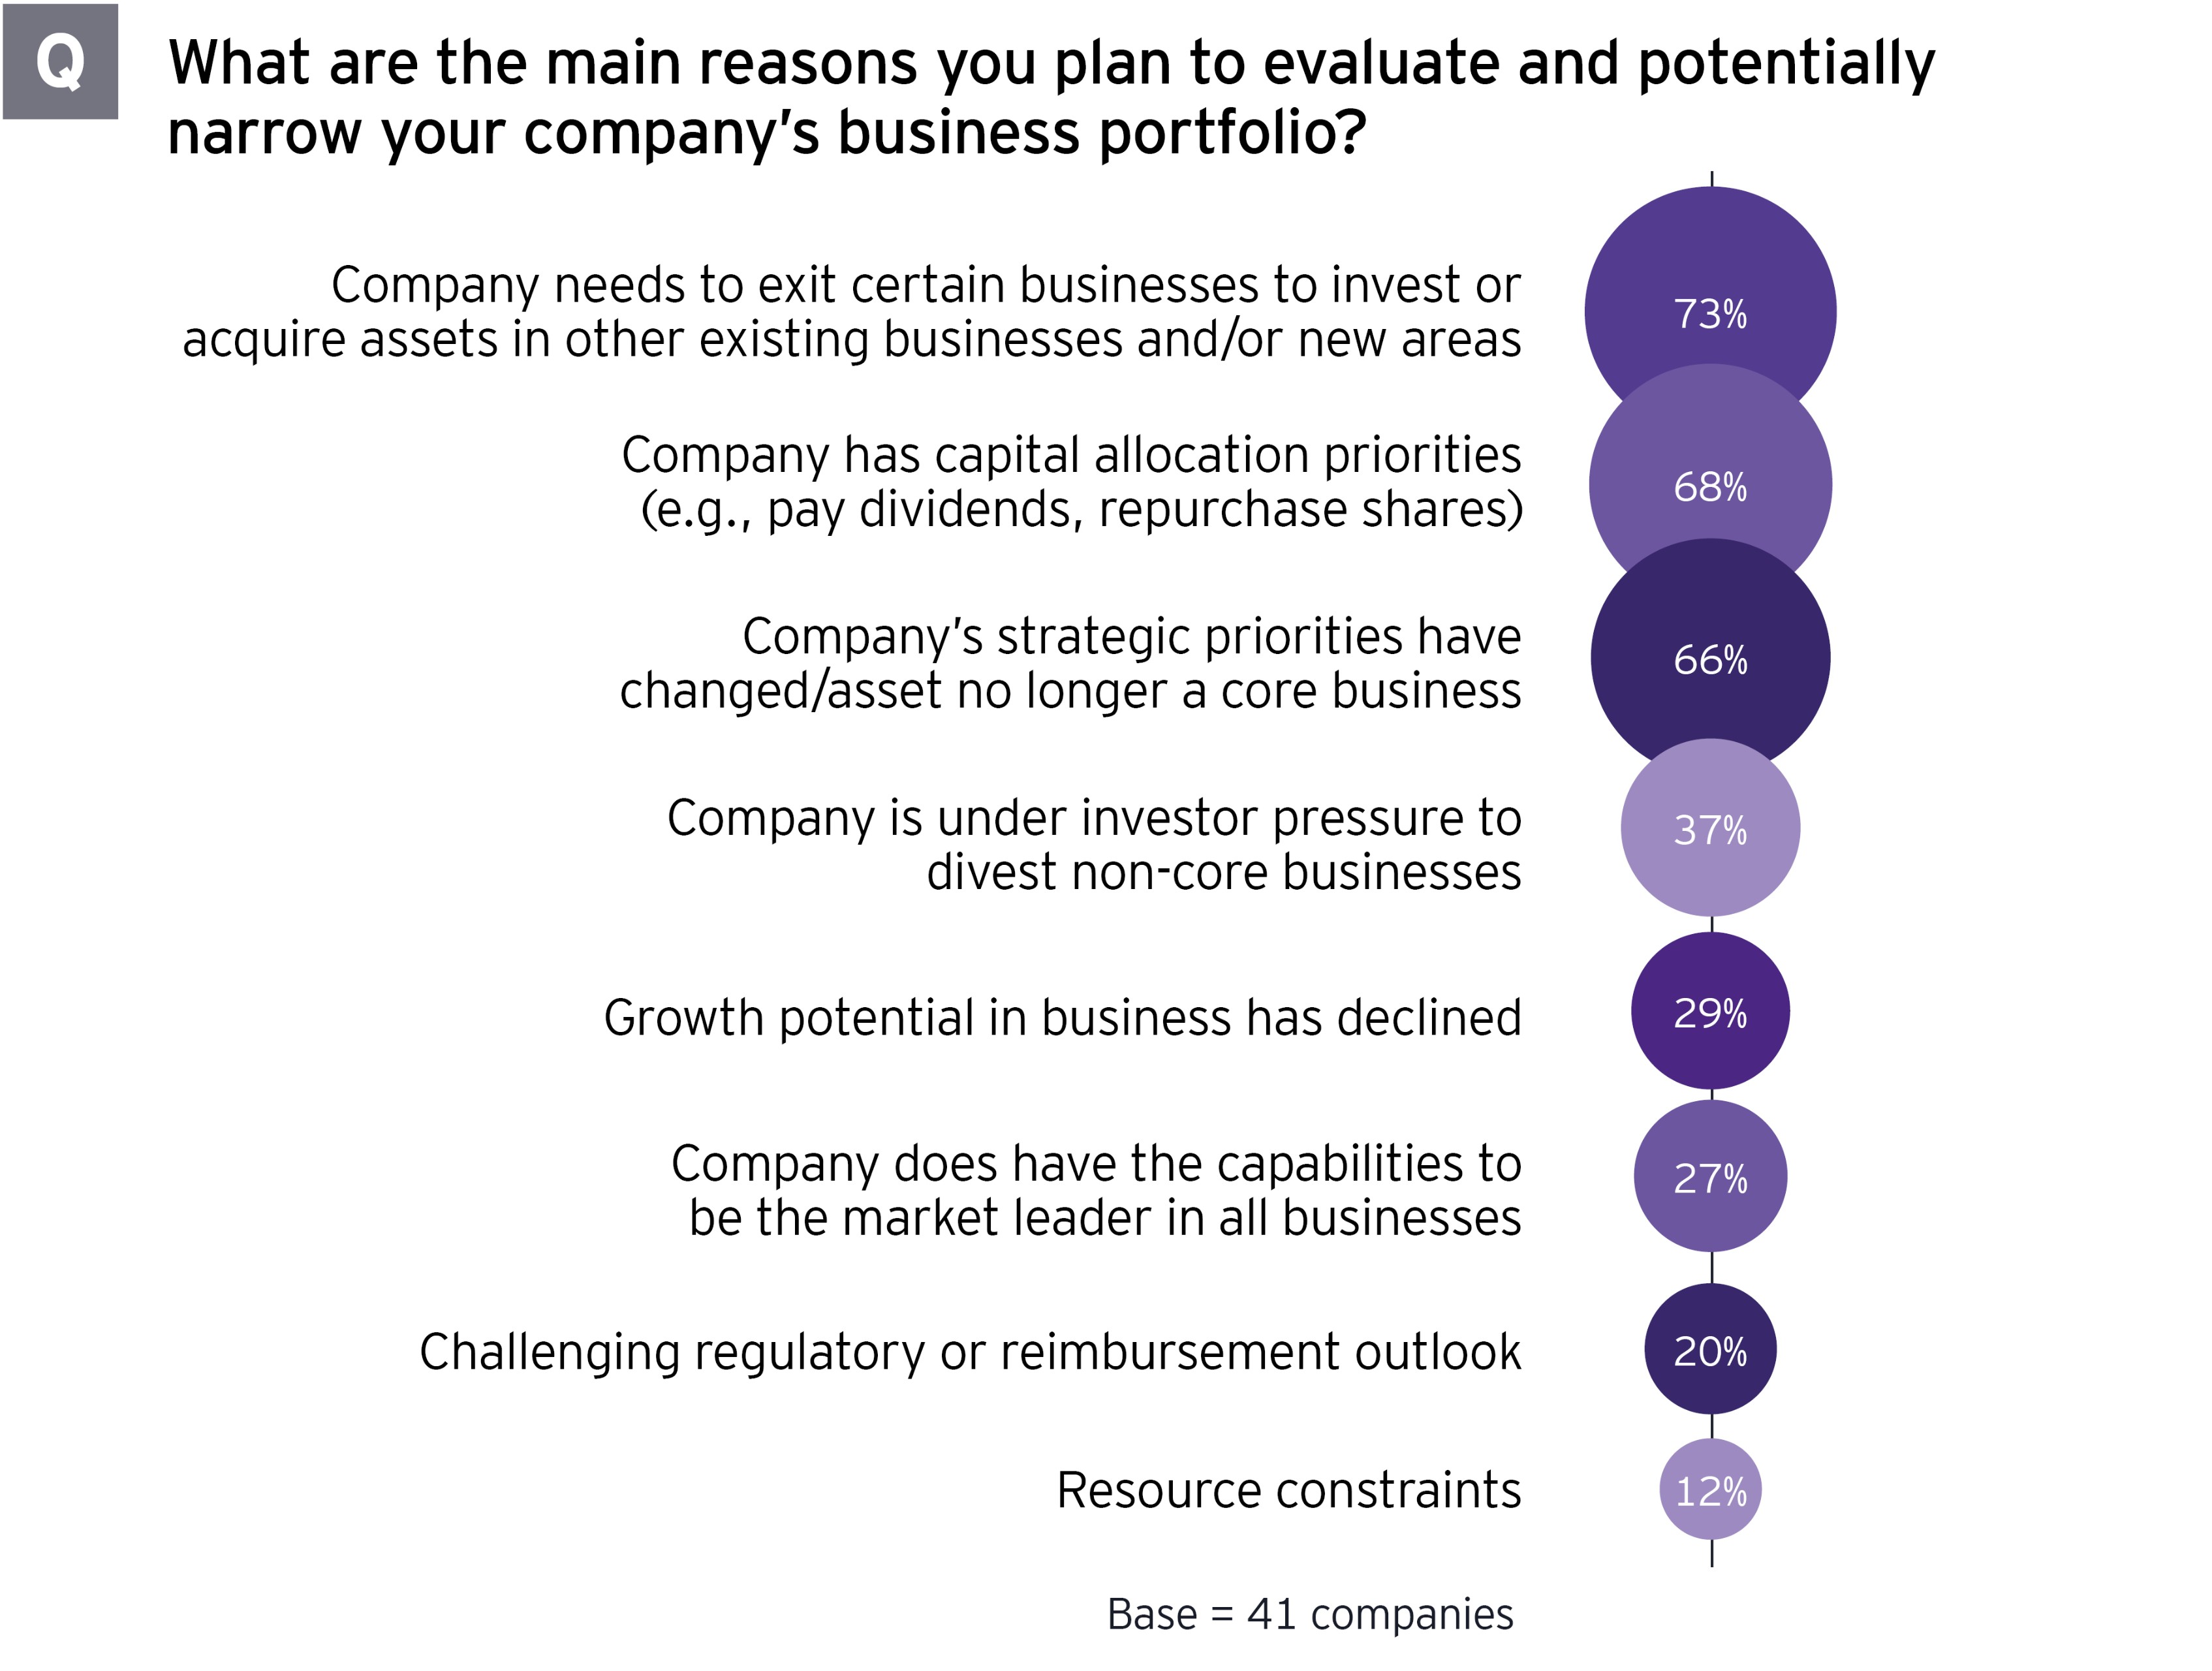 Reasons to evaluate and potentially narrow your life sciences company’s business portfolio